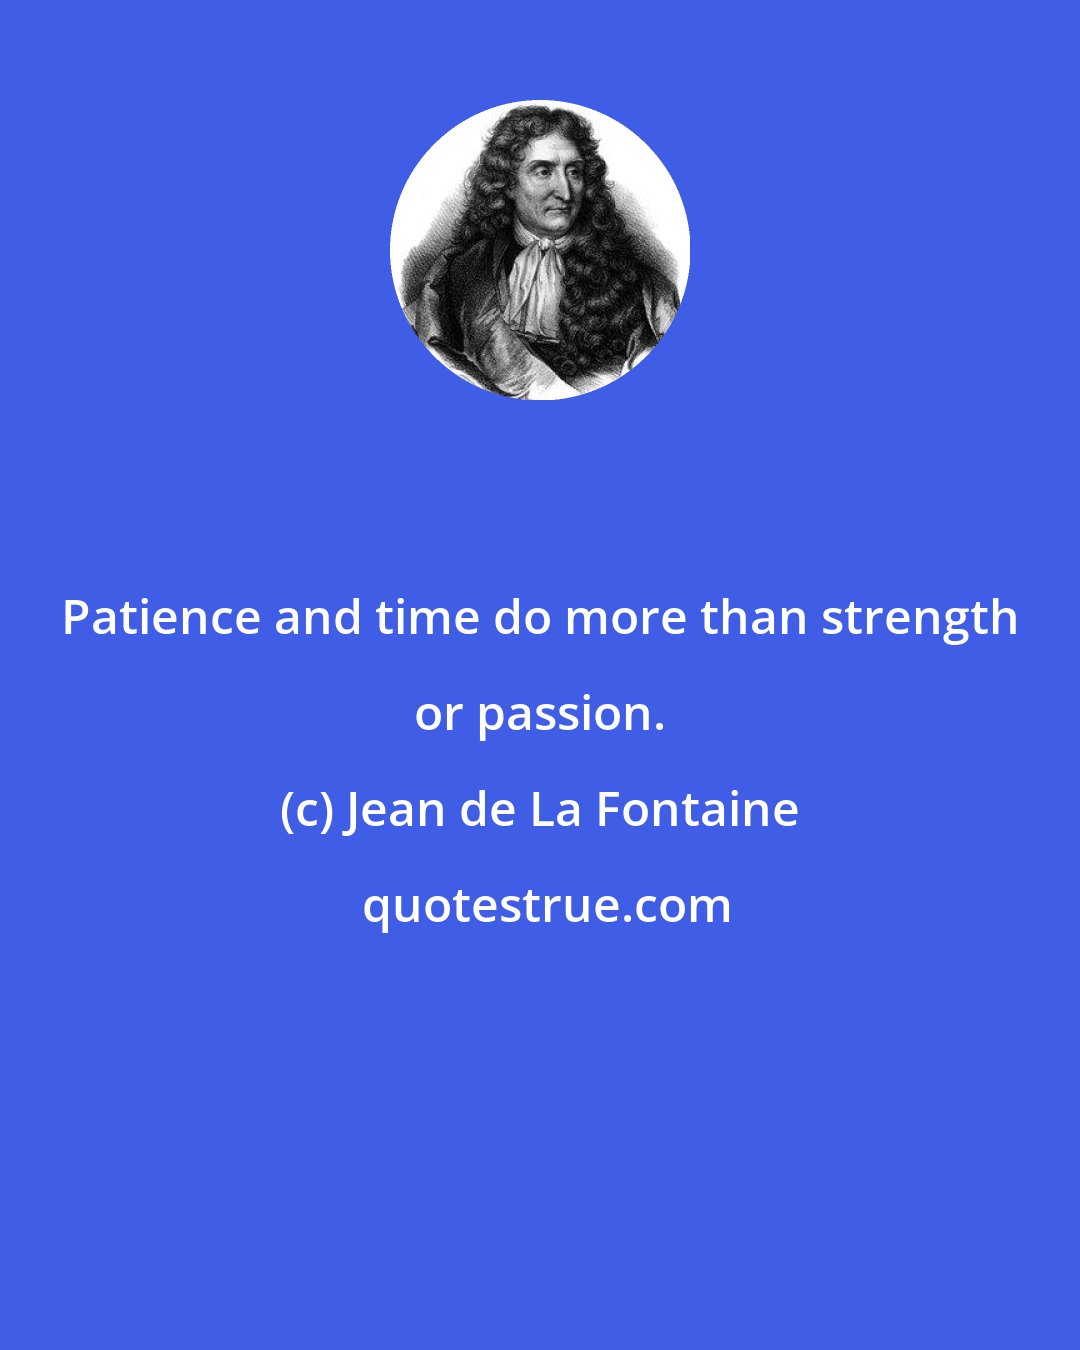 Jean de La Fontaine: Patience and time do more than strength or passion.